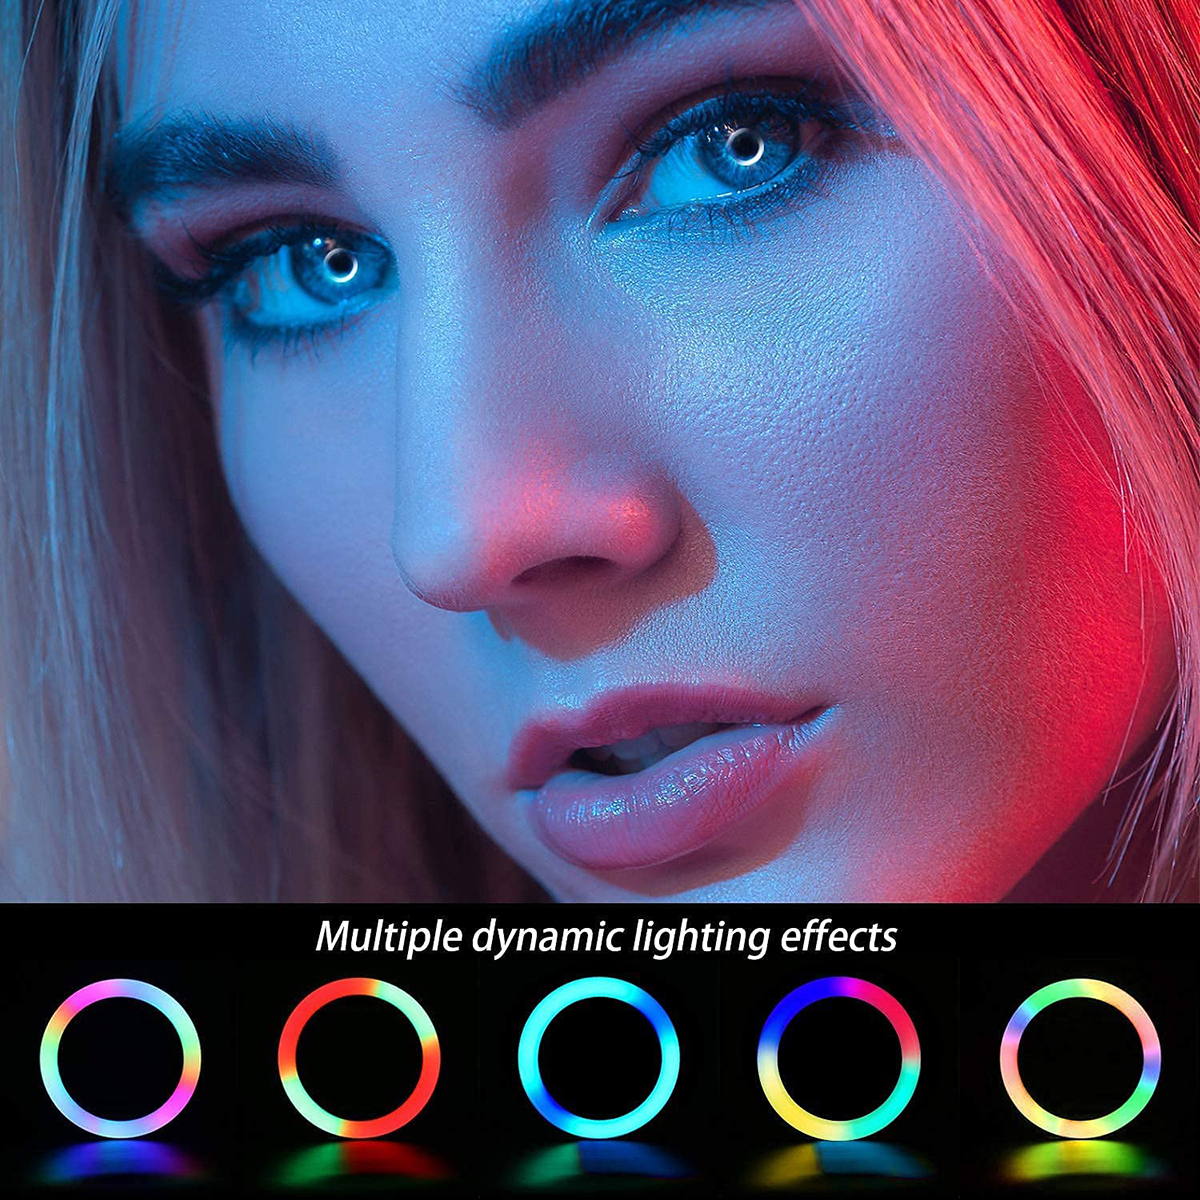 10-inch-3000K-6500K-LED-RGB-Ring-Light-With-Remote-Control-Tripod-Portable-USB-Ring-Light-Lamp-for-V-1949977-9